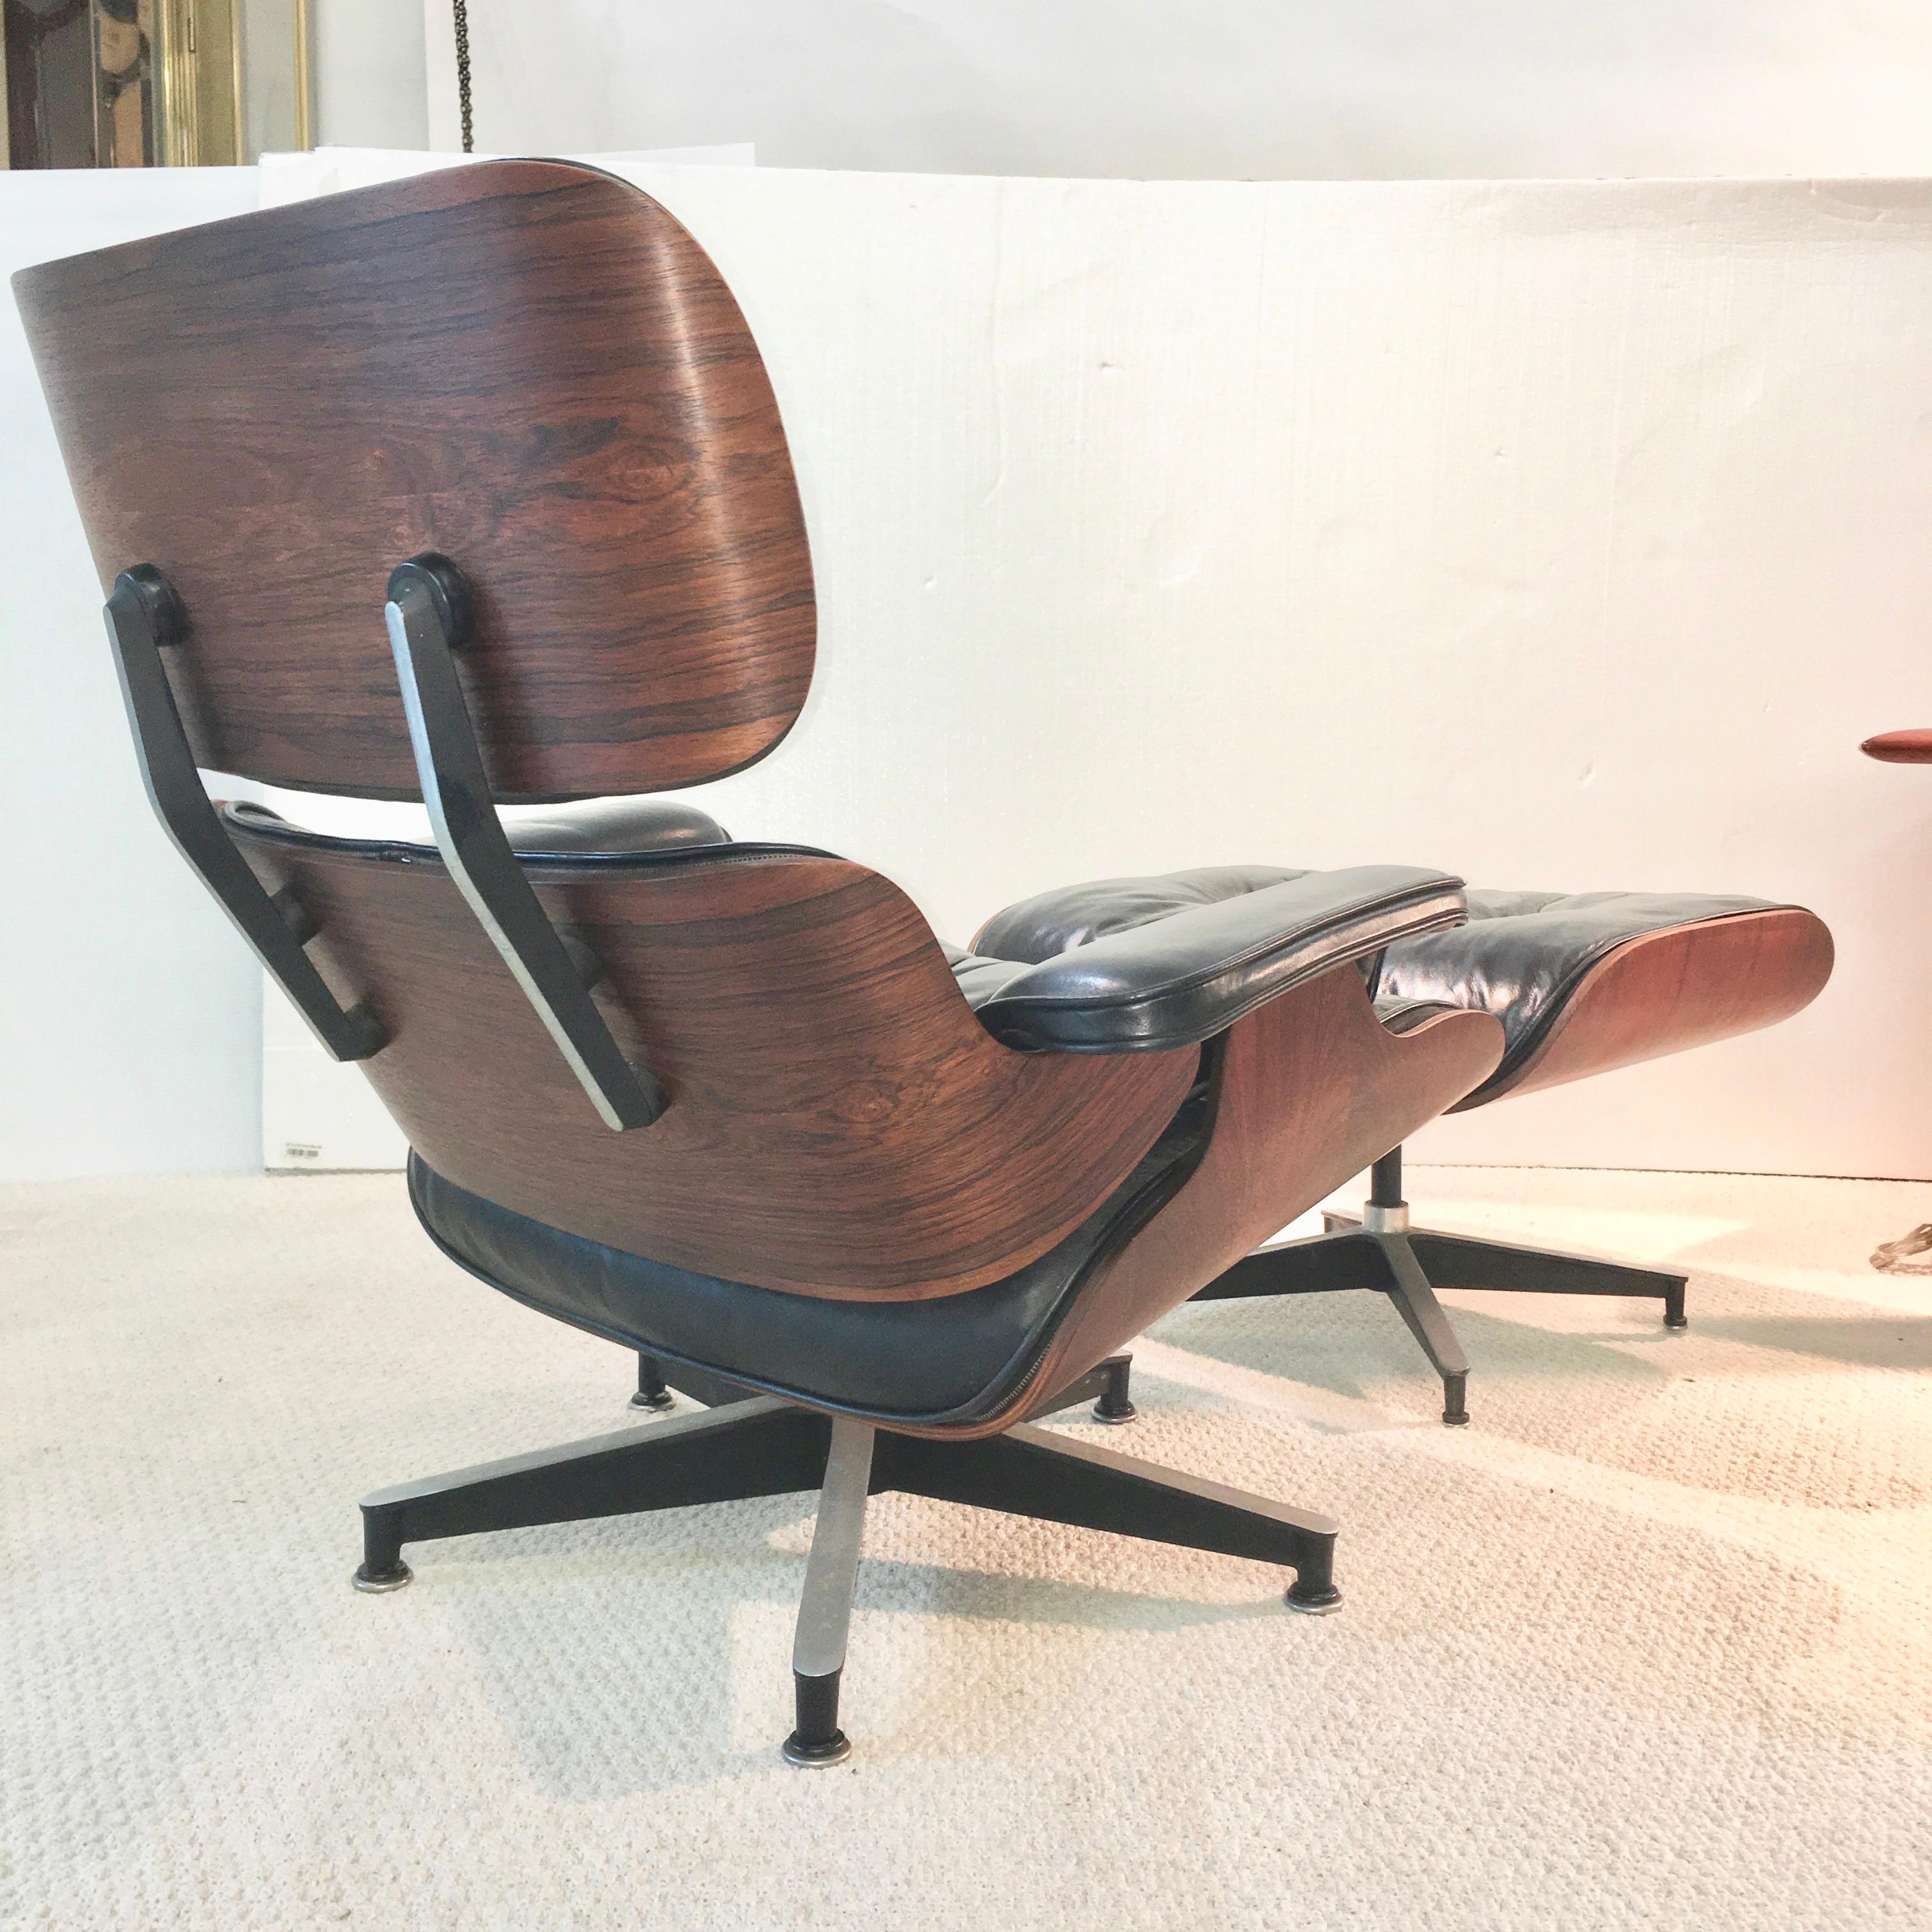 Very nice example of a 1960s Herman Miller 670/671 lounge chair and ottoman in hand rubbed oil finish rosewood veneer and original black leather cushions with original feather down wrapped foam cushion inserts. Round Herman Miller label present on